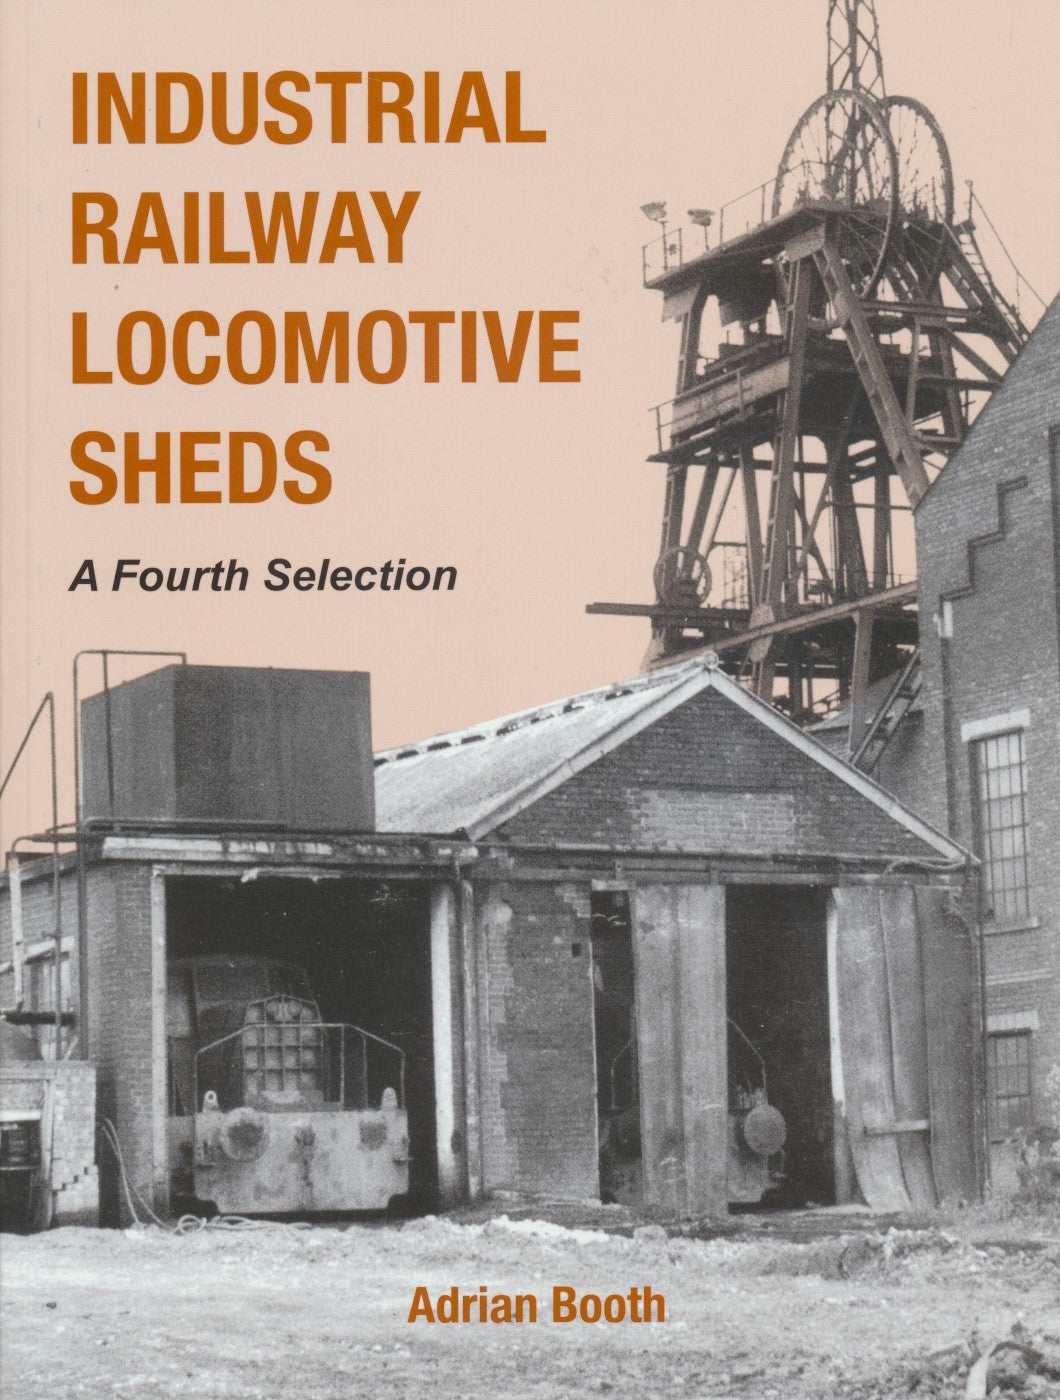 Industrial Railway Locomotive Sheds - A Fourth Selection